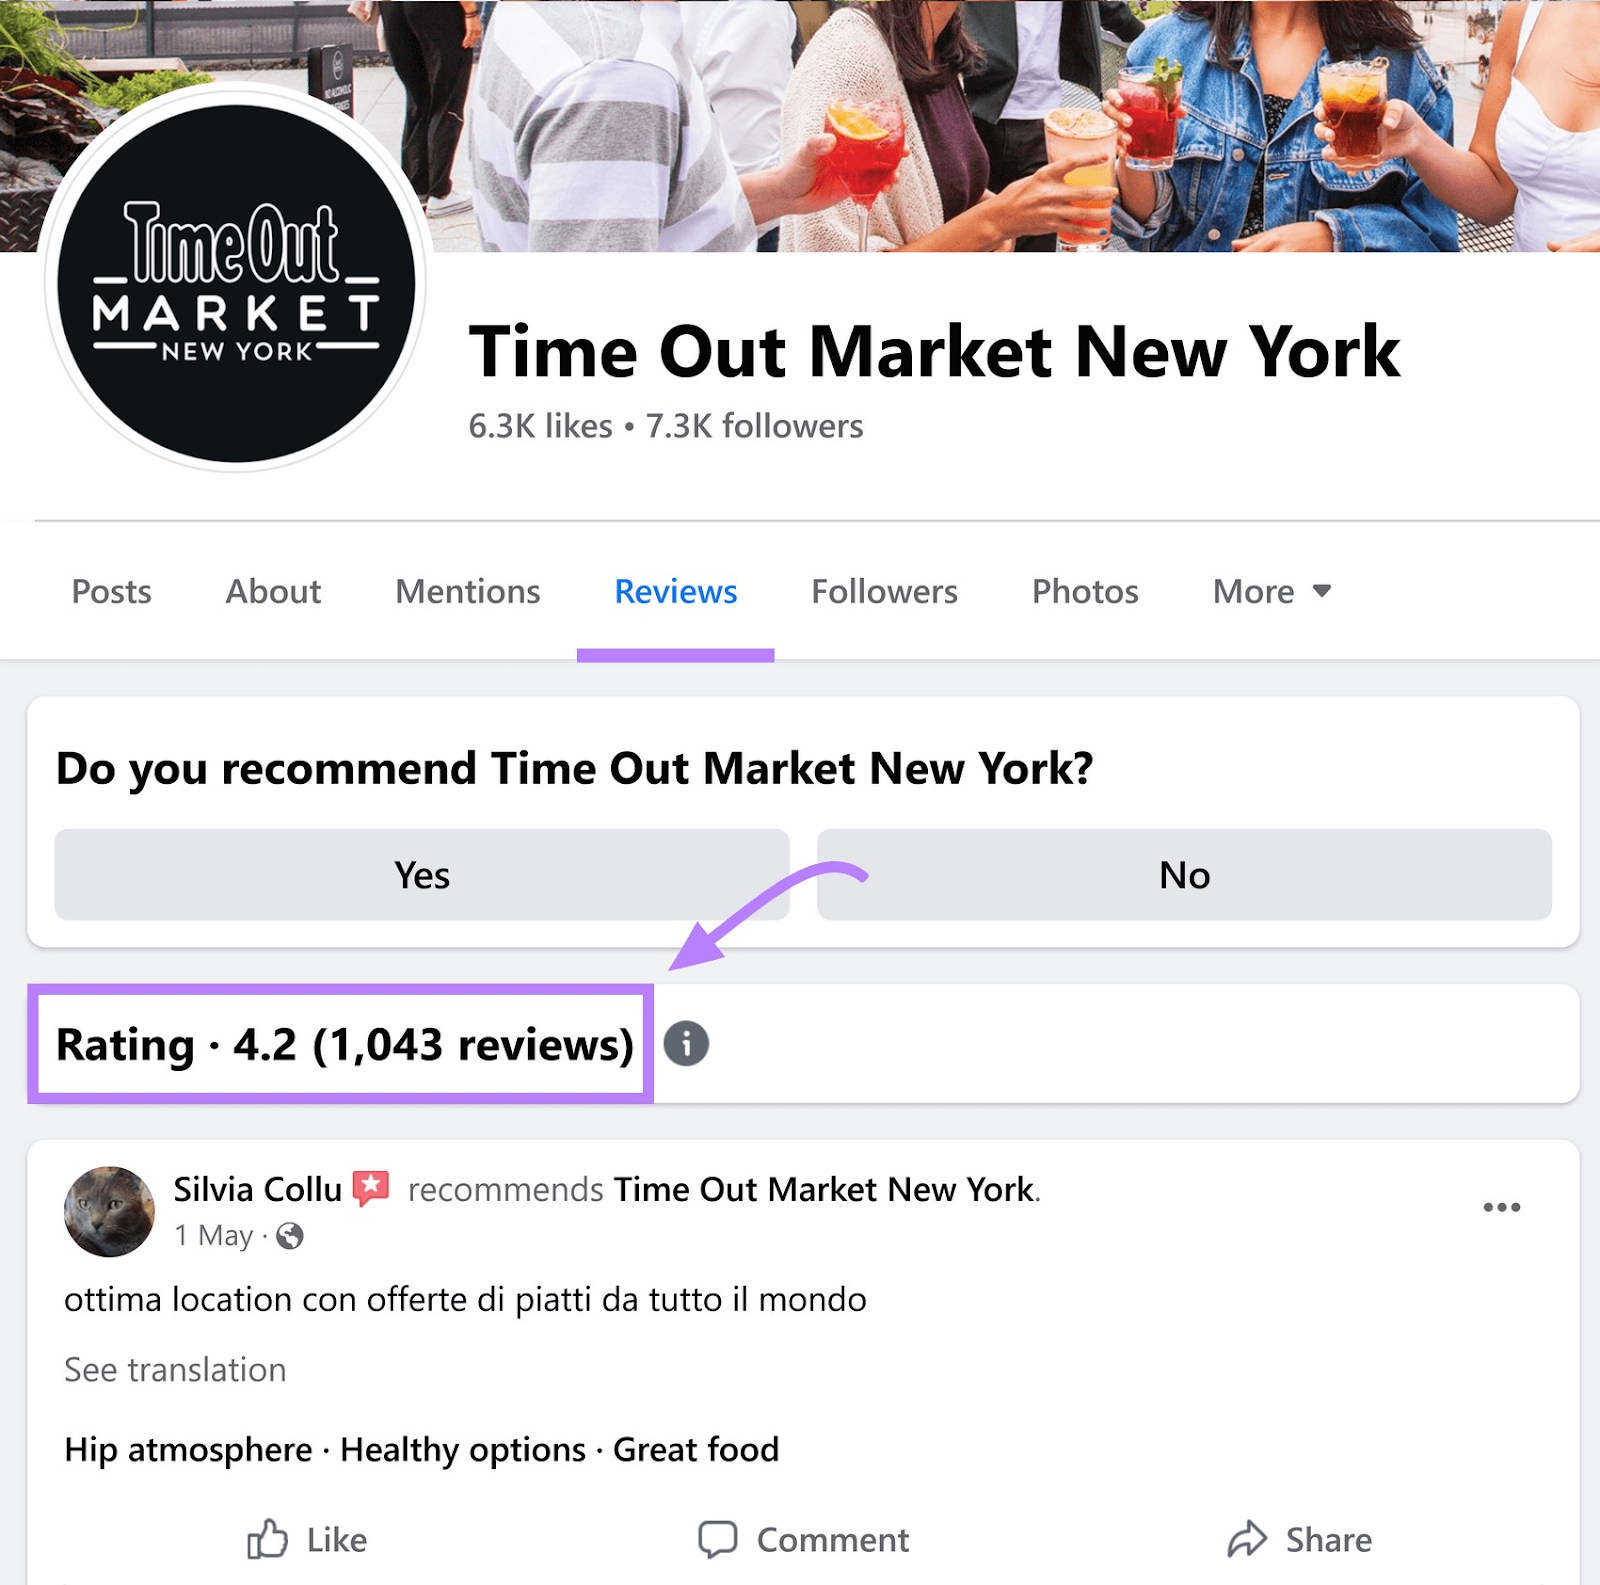 an example from Facebook showing the rating and reviews a business has gotten for "Time Out Market New York"